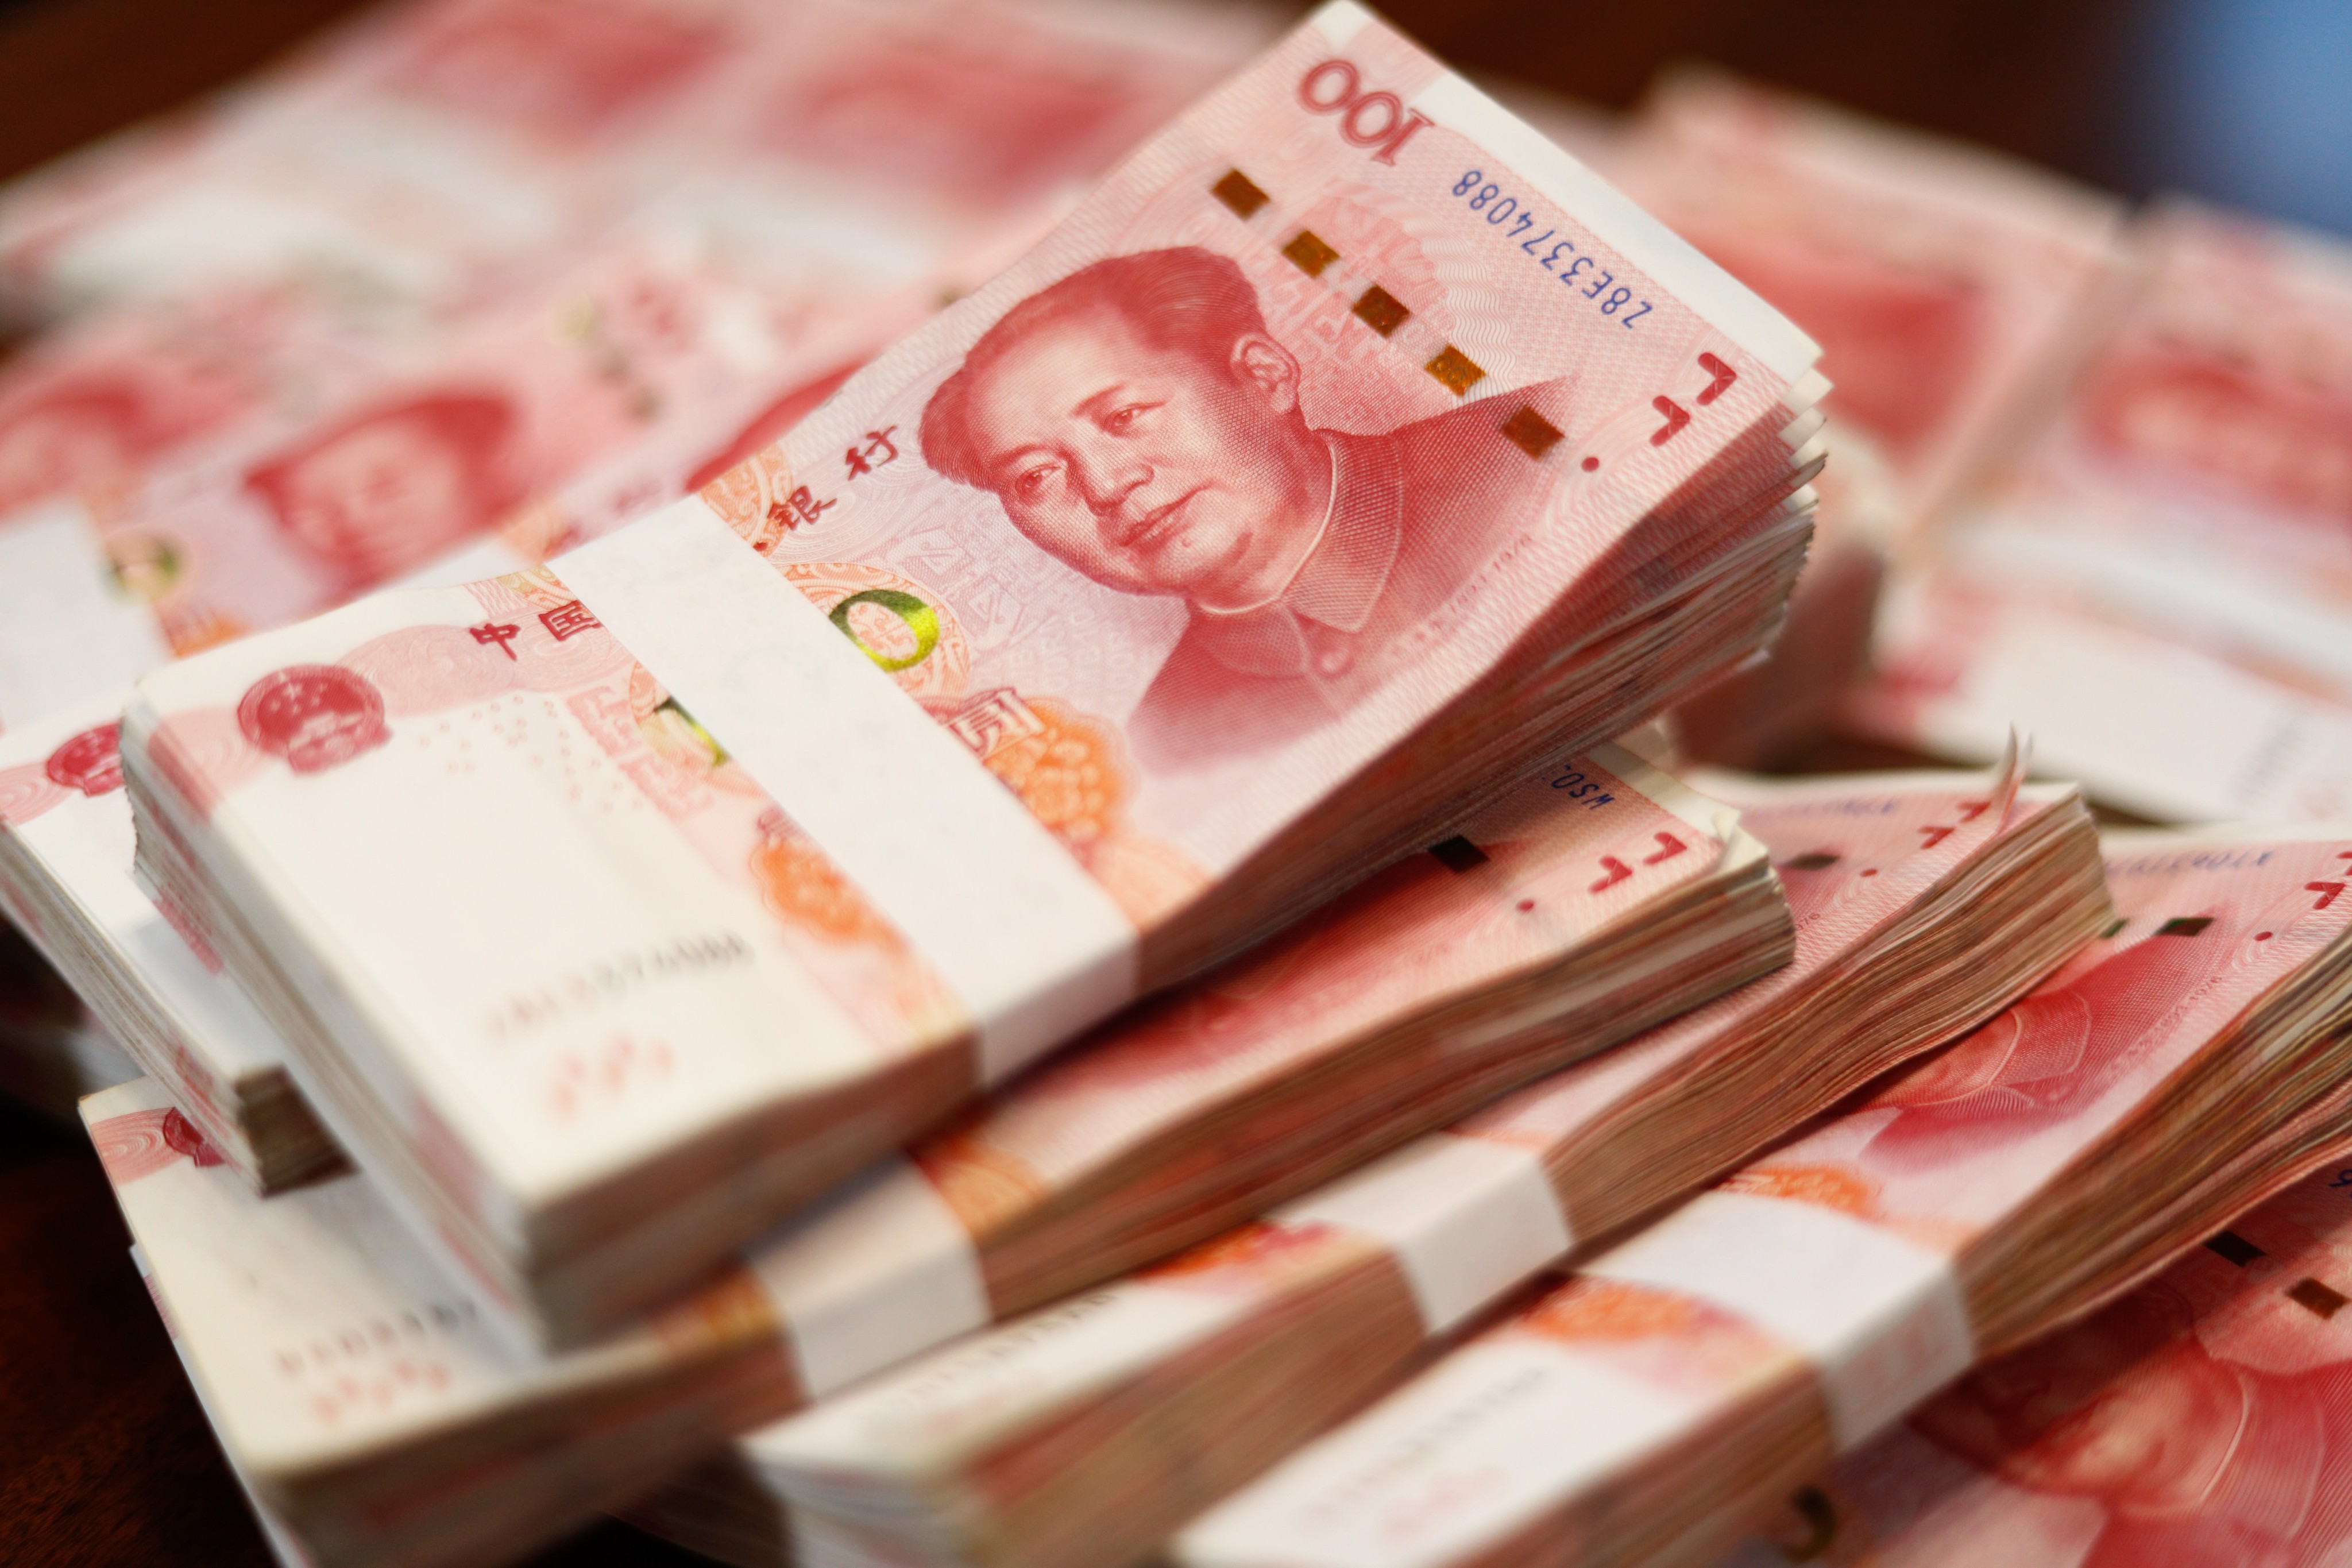 A recent weakening of China’s yuan came as April economic data showed a broad slowing of economic activities. Photo: Shutterstock